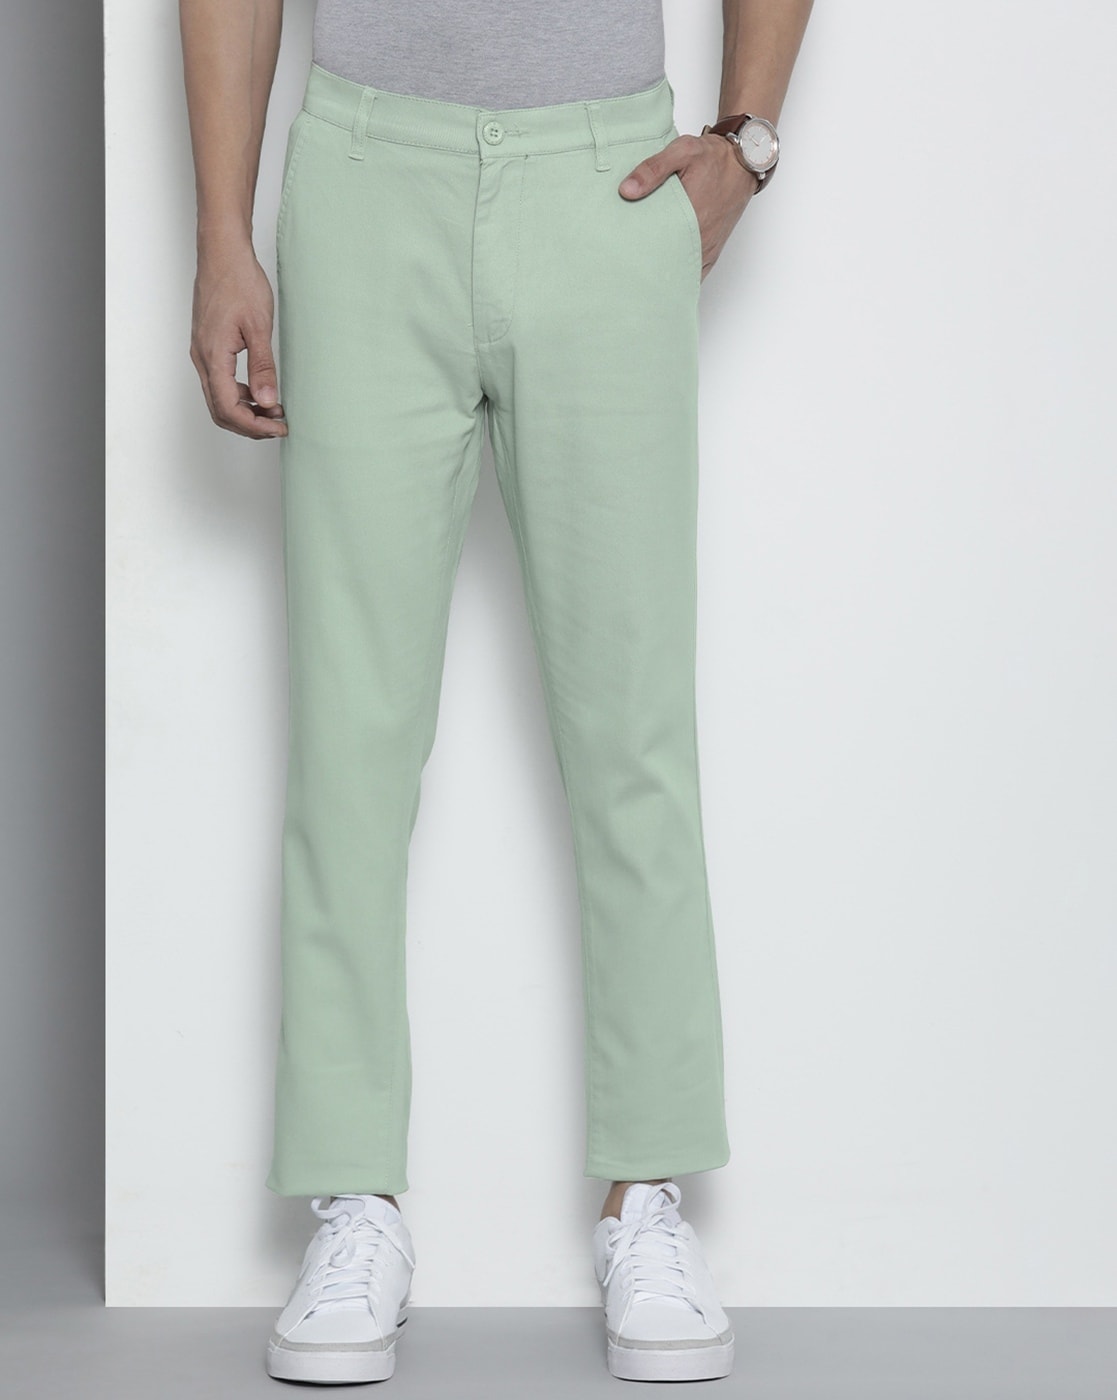 Buy Peter England Green Cotton Slim Fit Trousers for Mens Online  Tata CLiQ